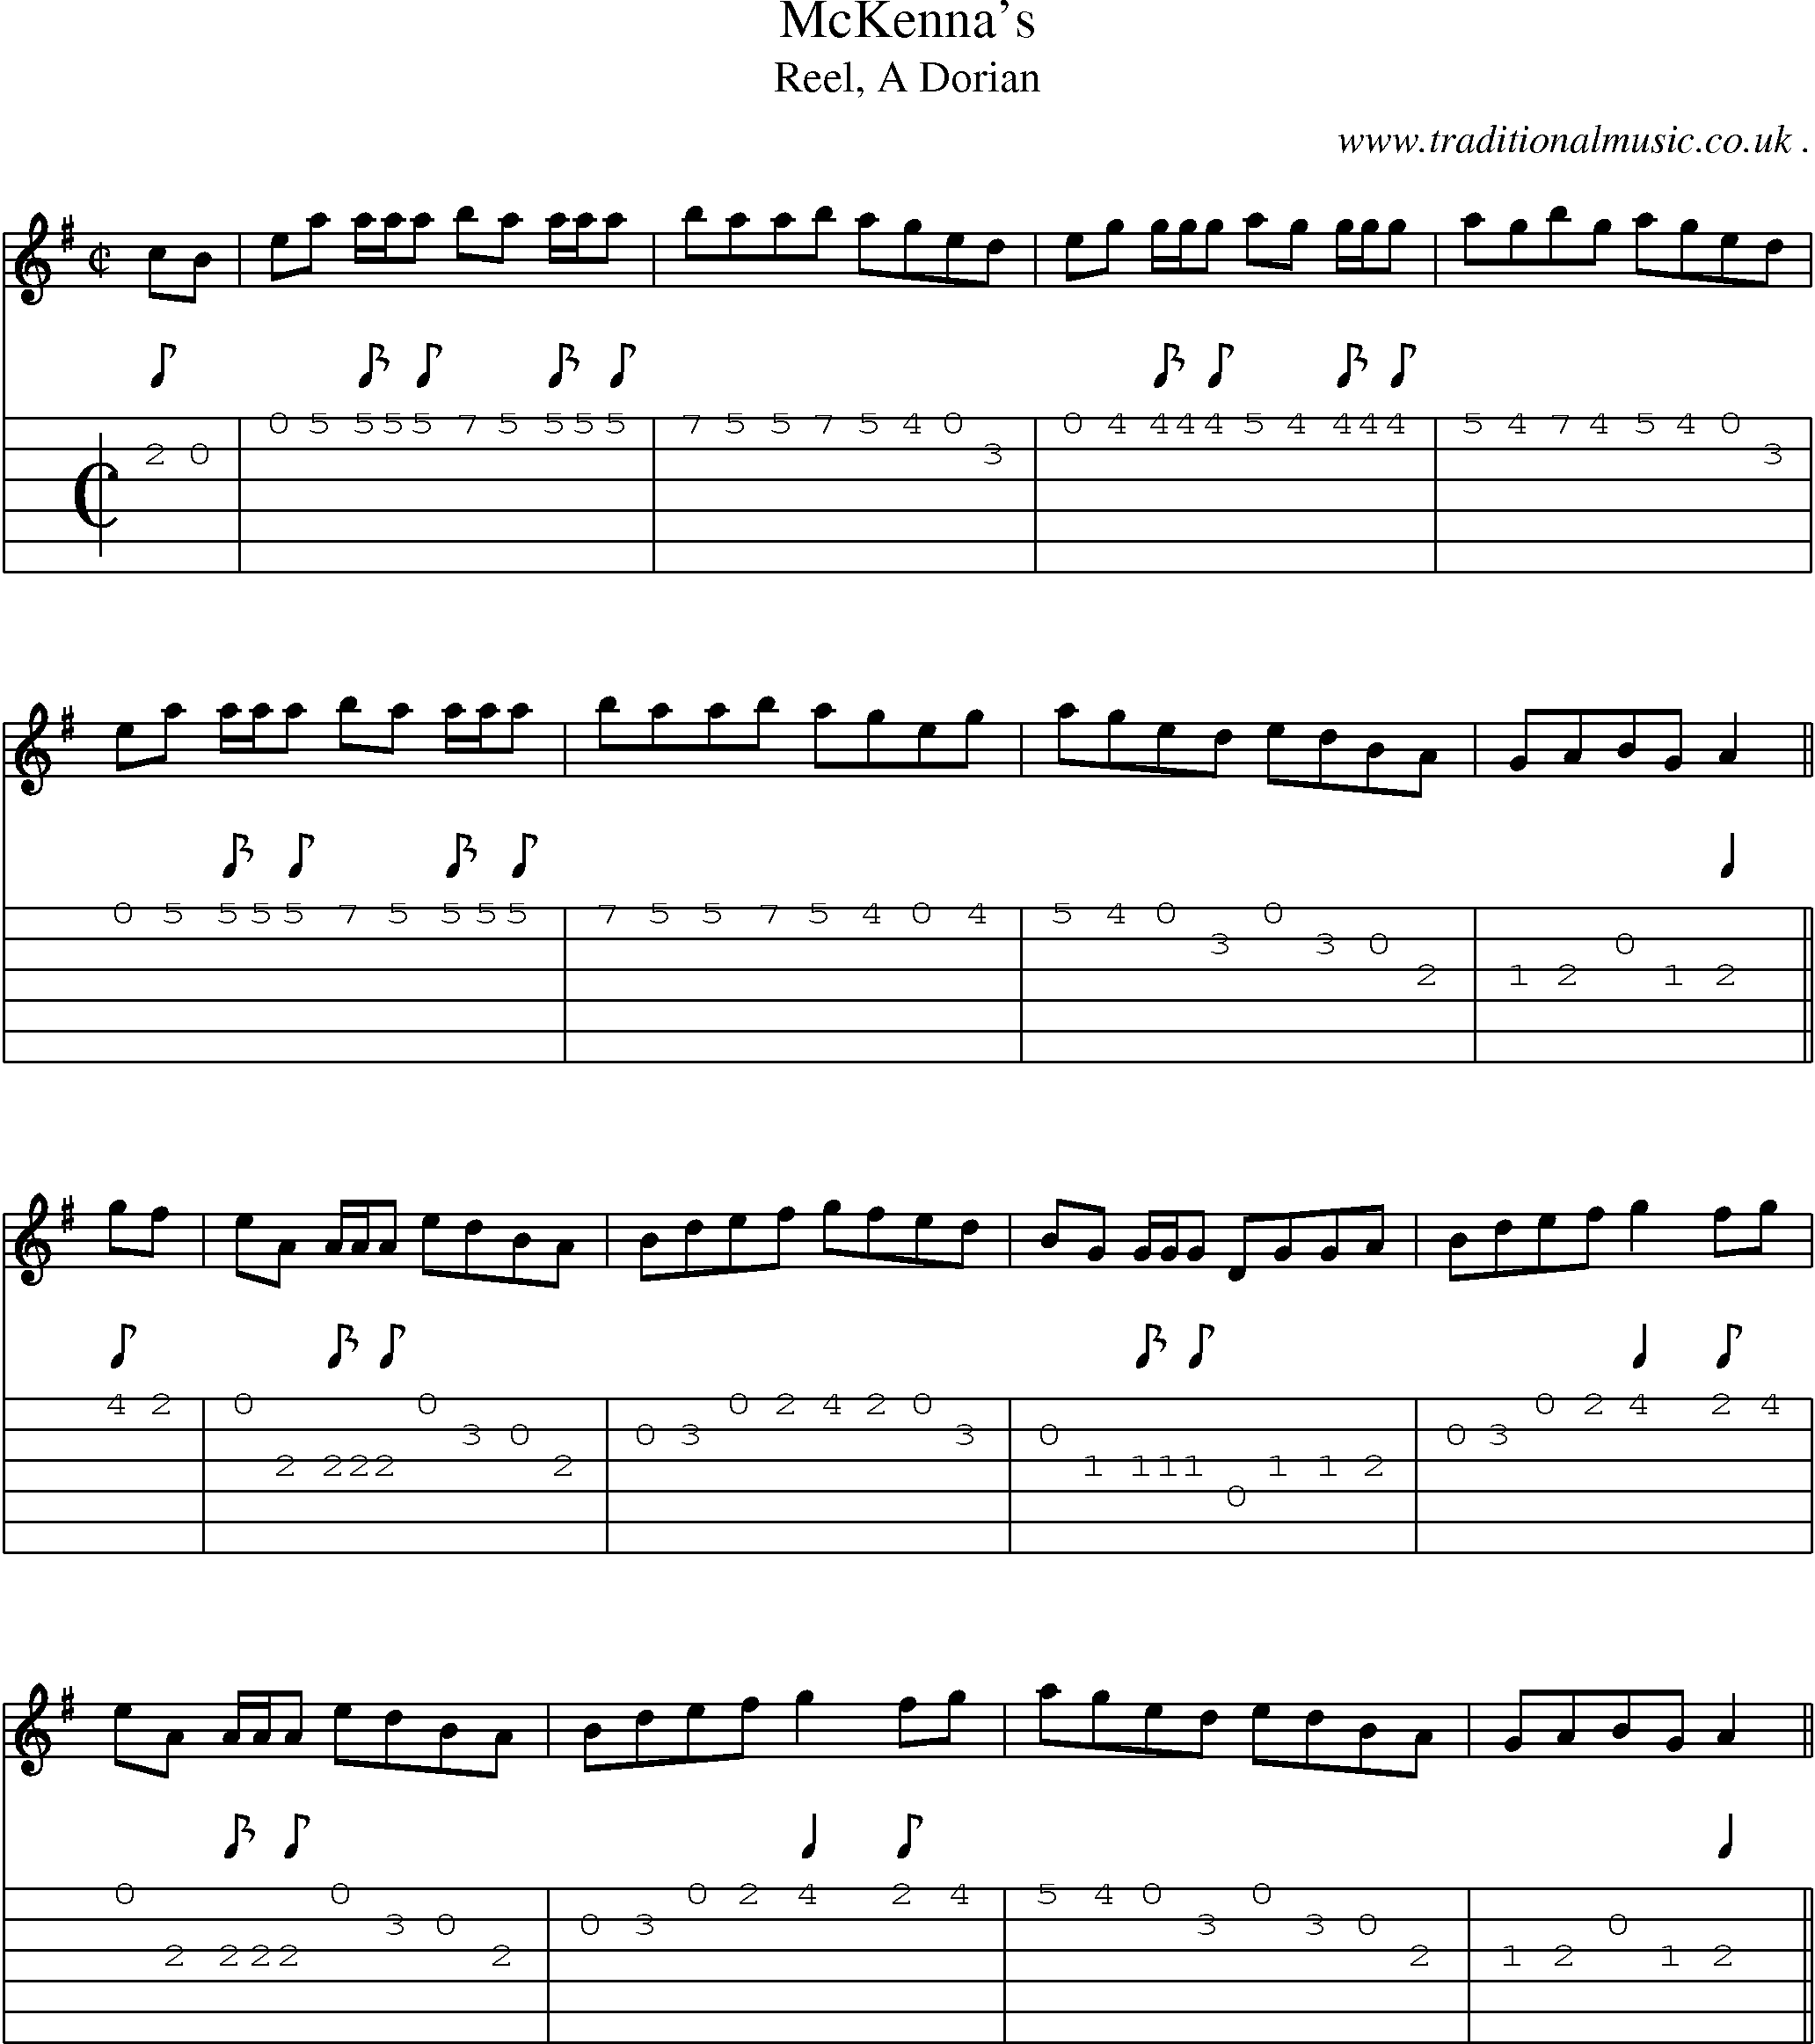 Sheet-music  score, Chords and Guitar Tabs for Mckennas